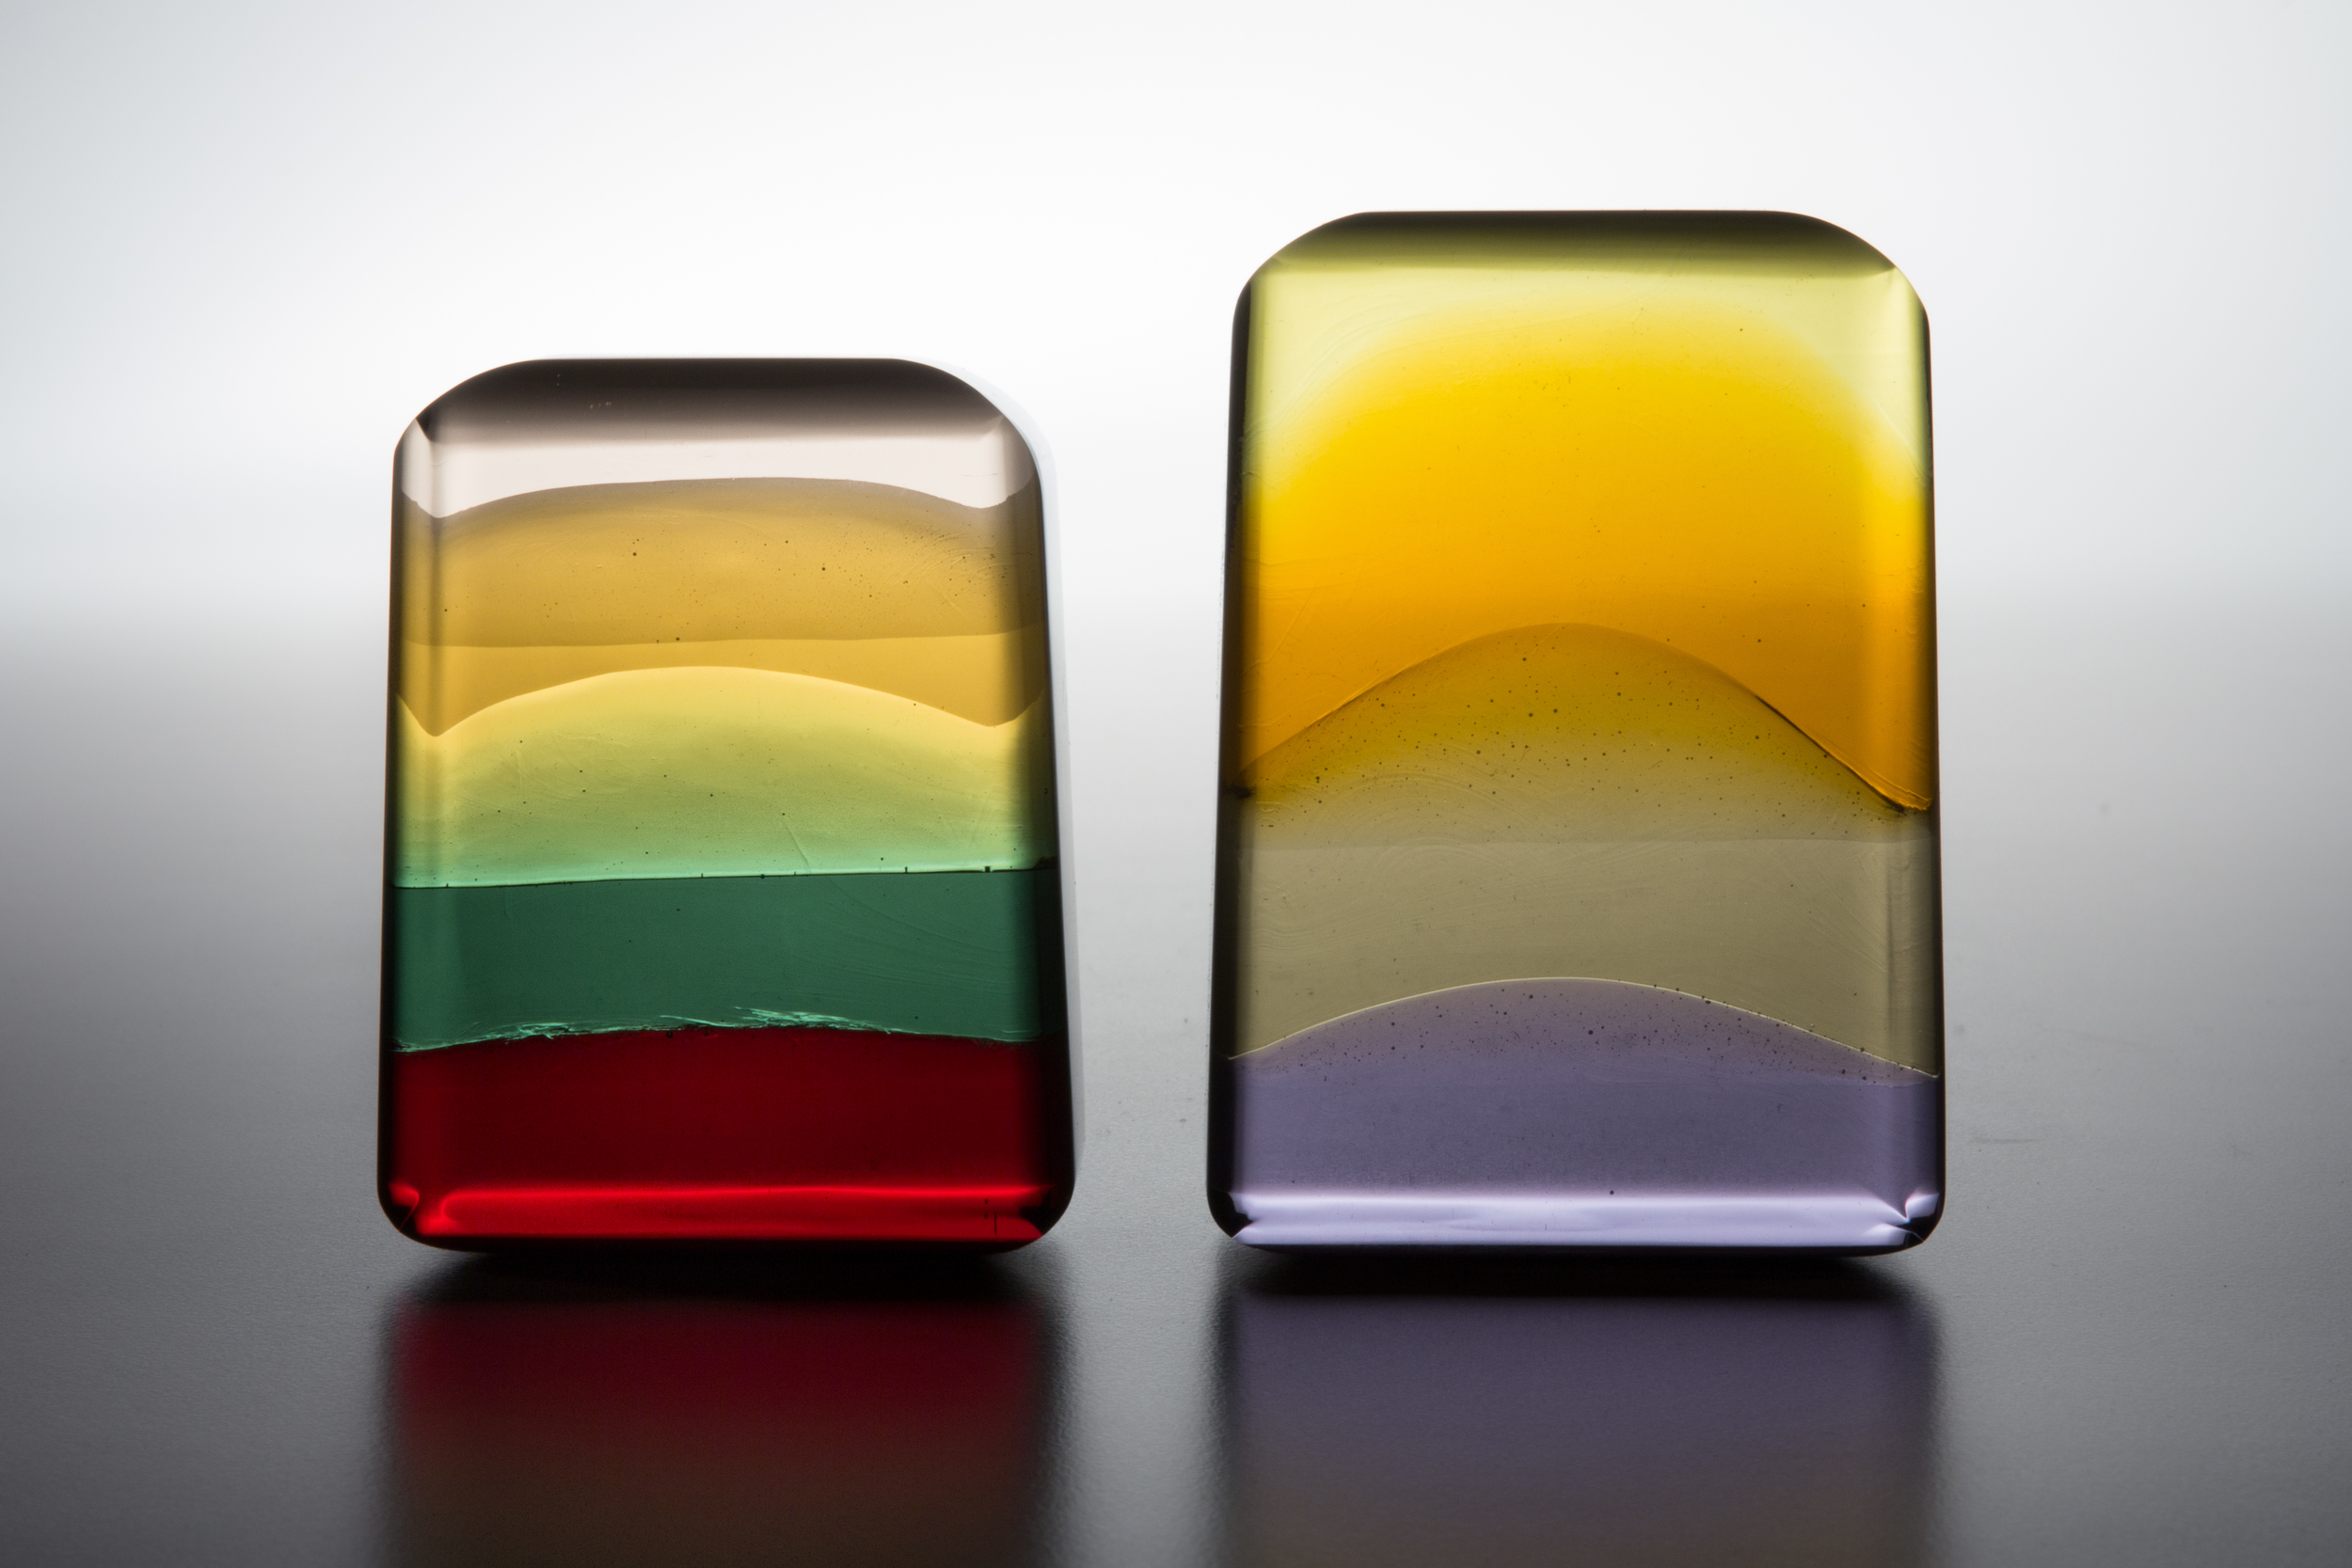   Polychromasia&nbsp;8+9 , cast, cut and polished glass, 2013 